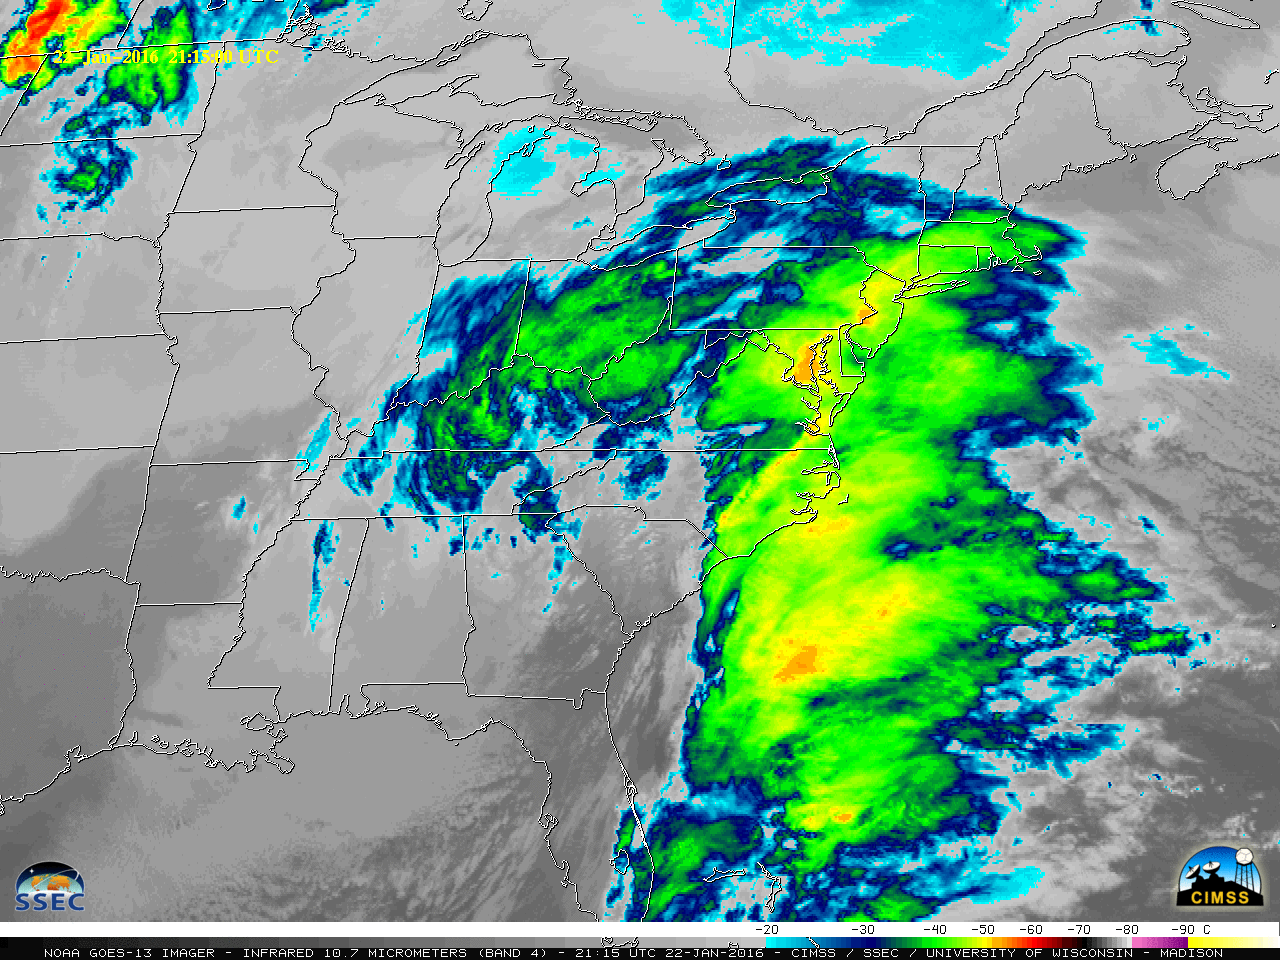 GOES-13 Infrared window (10.7 µm) images [click to play animation]